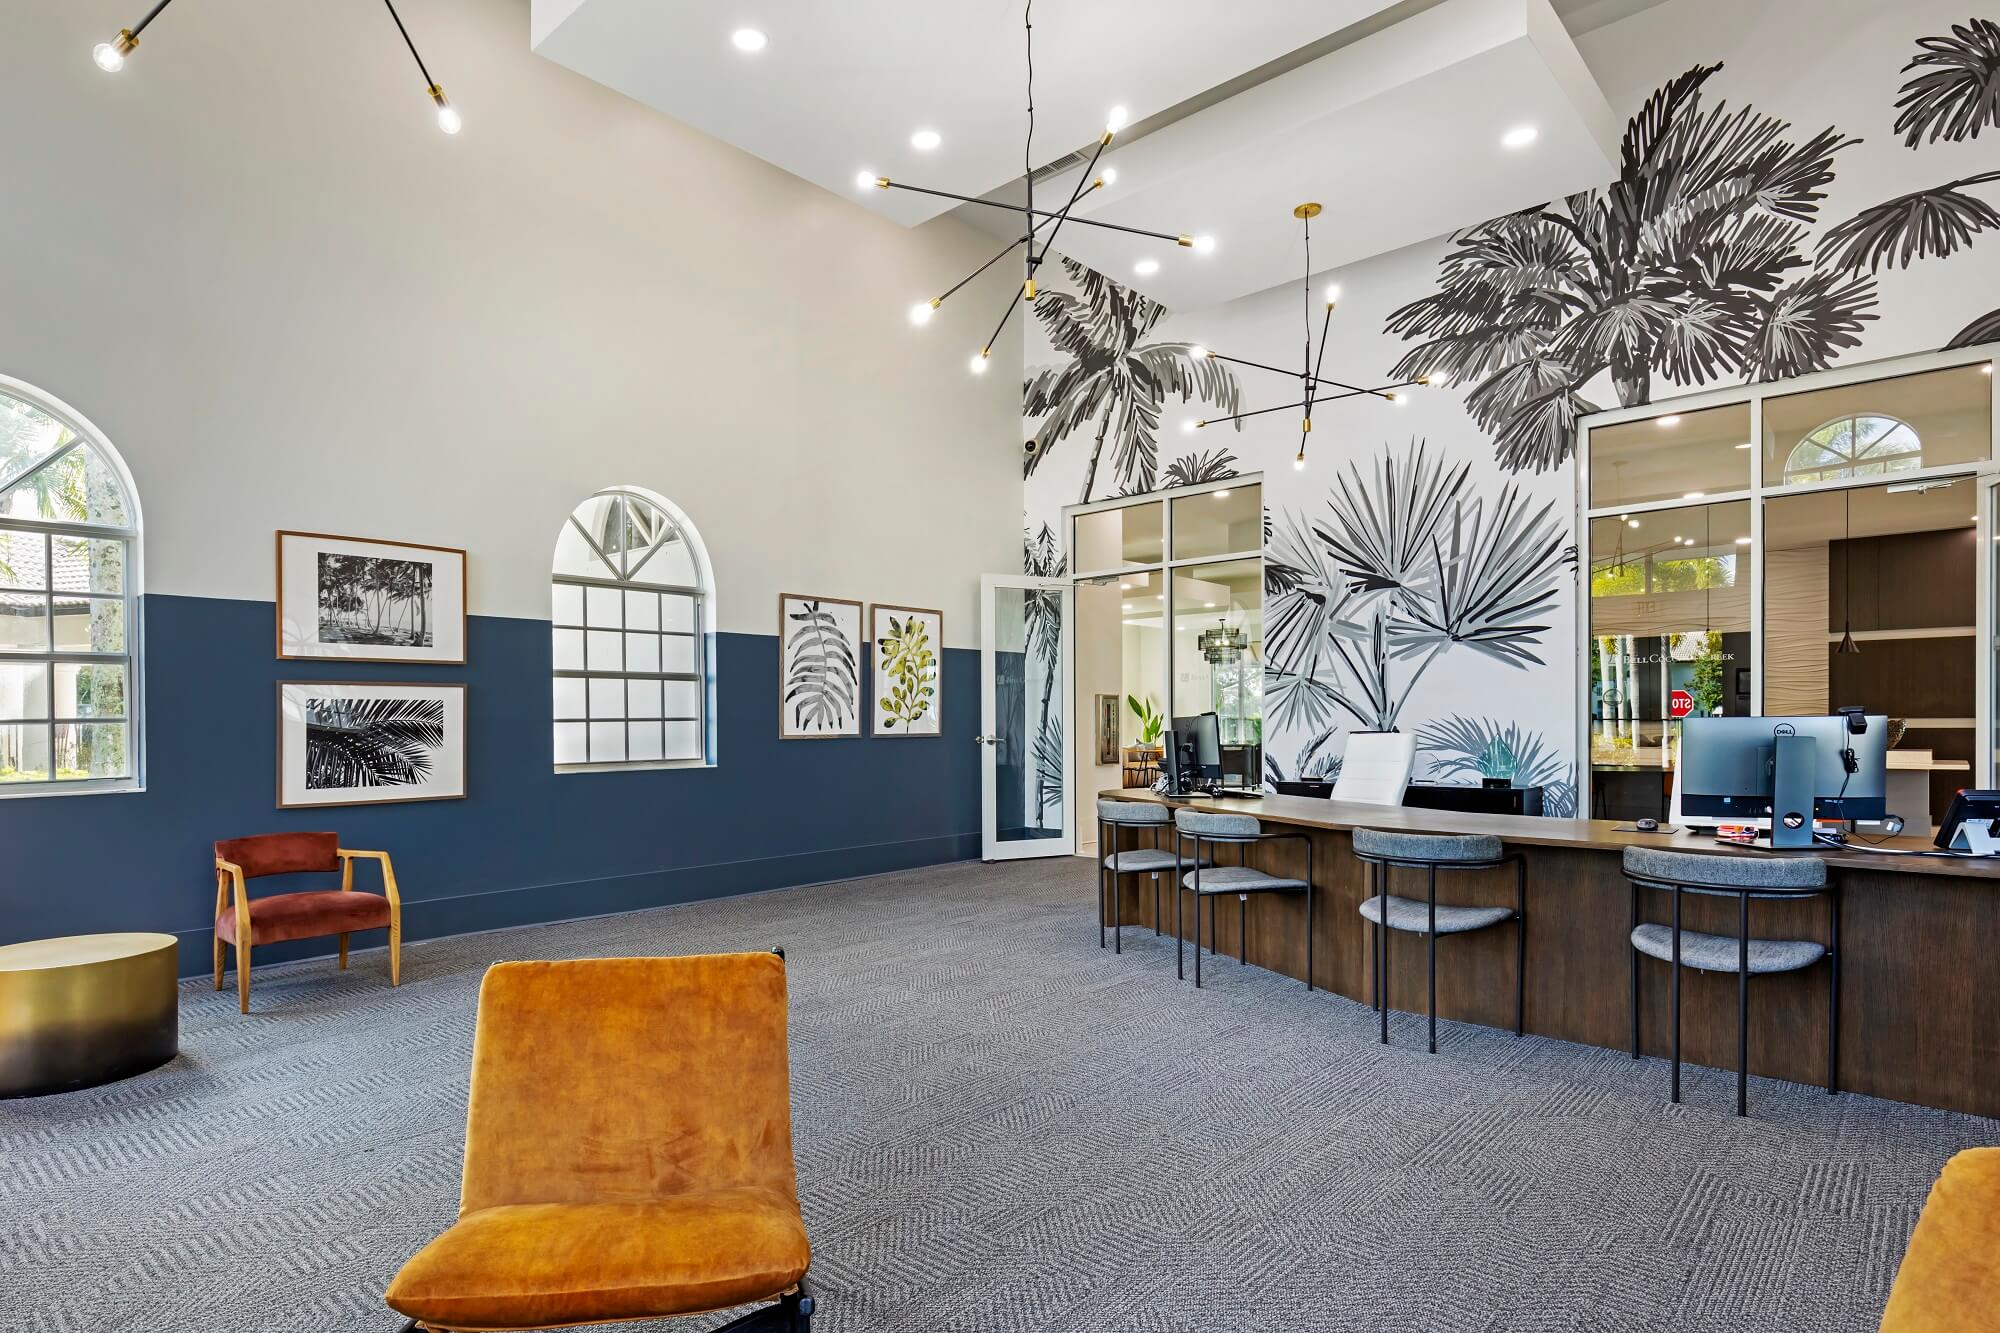 Leasing office employee desks with floral mural on the back wall with waiting area seating